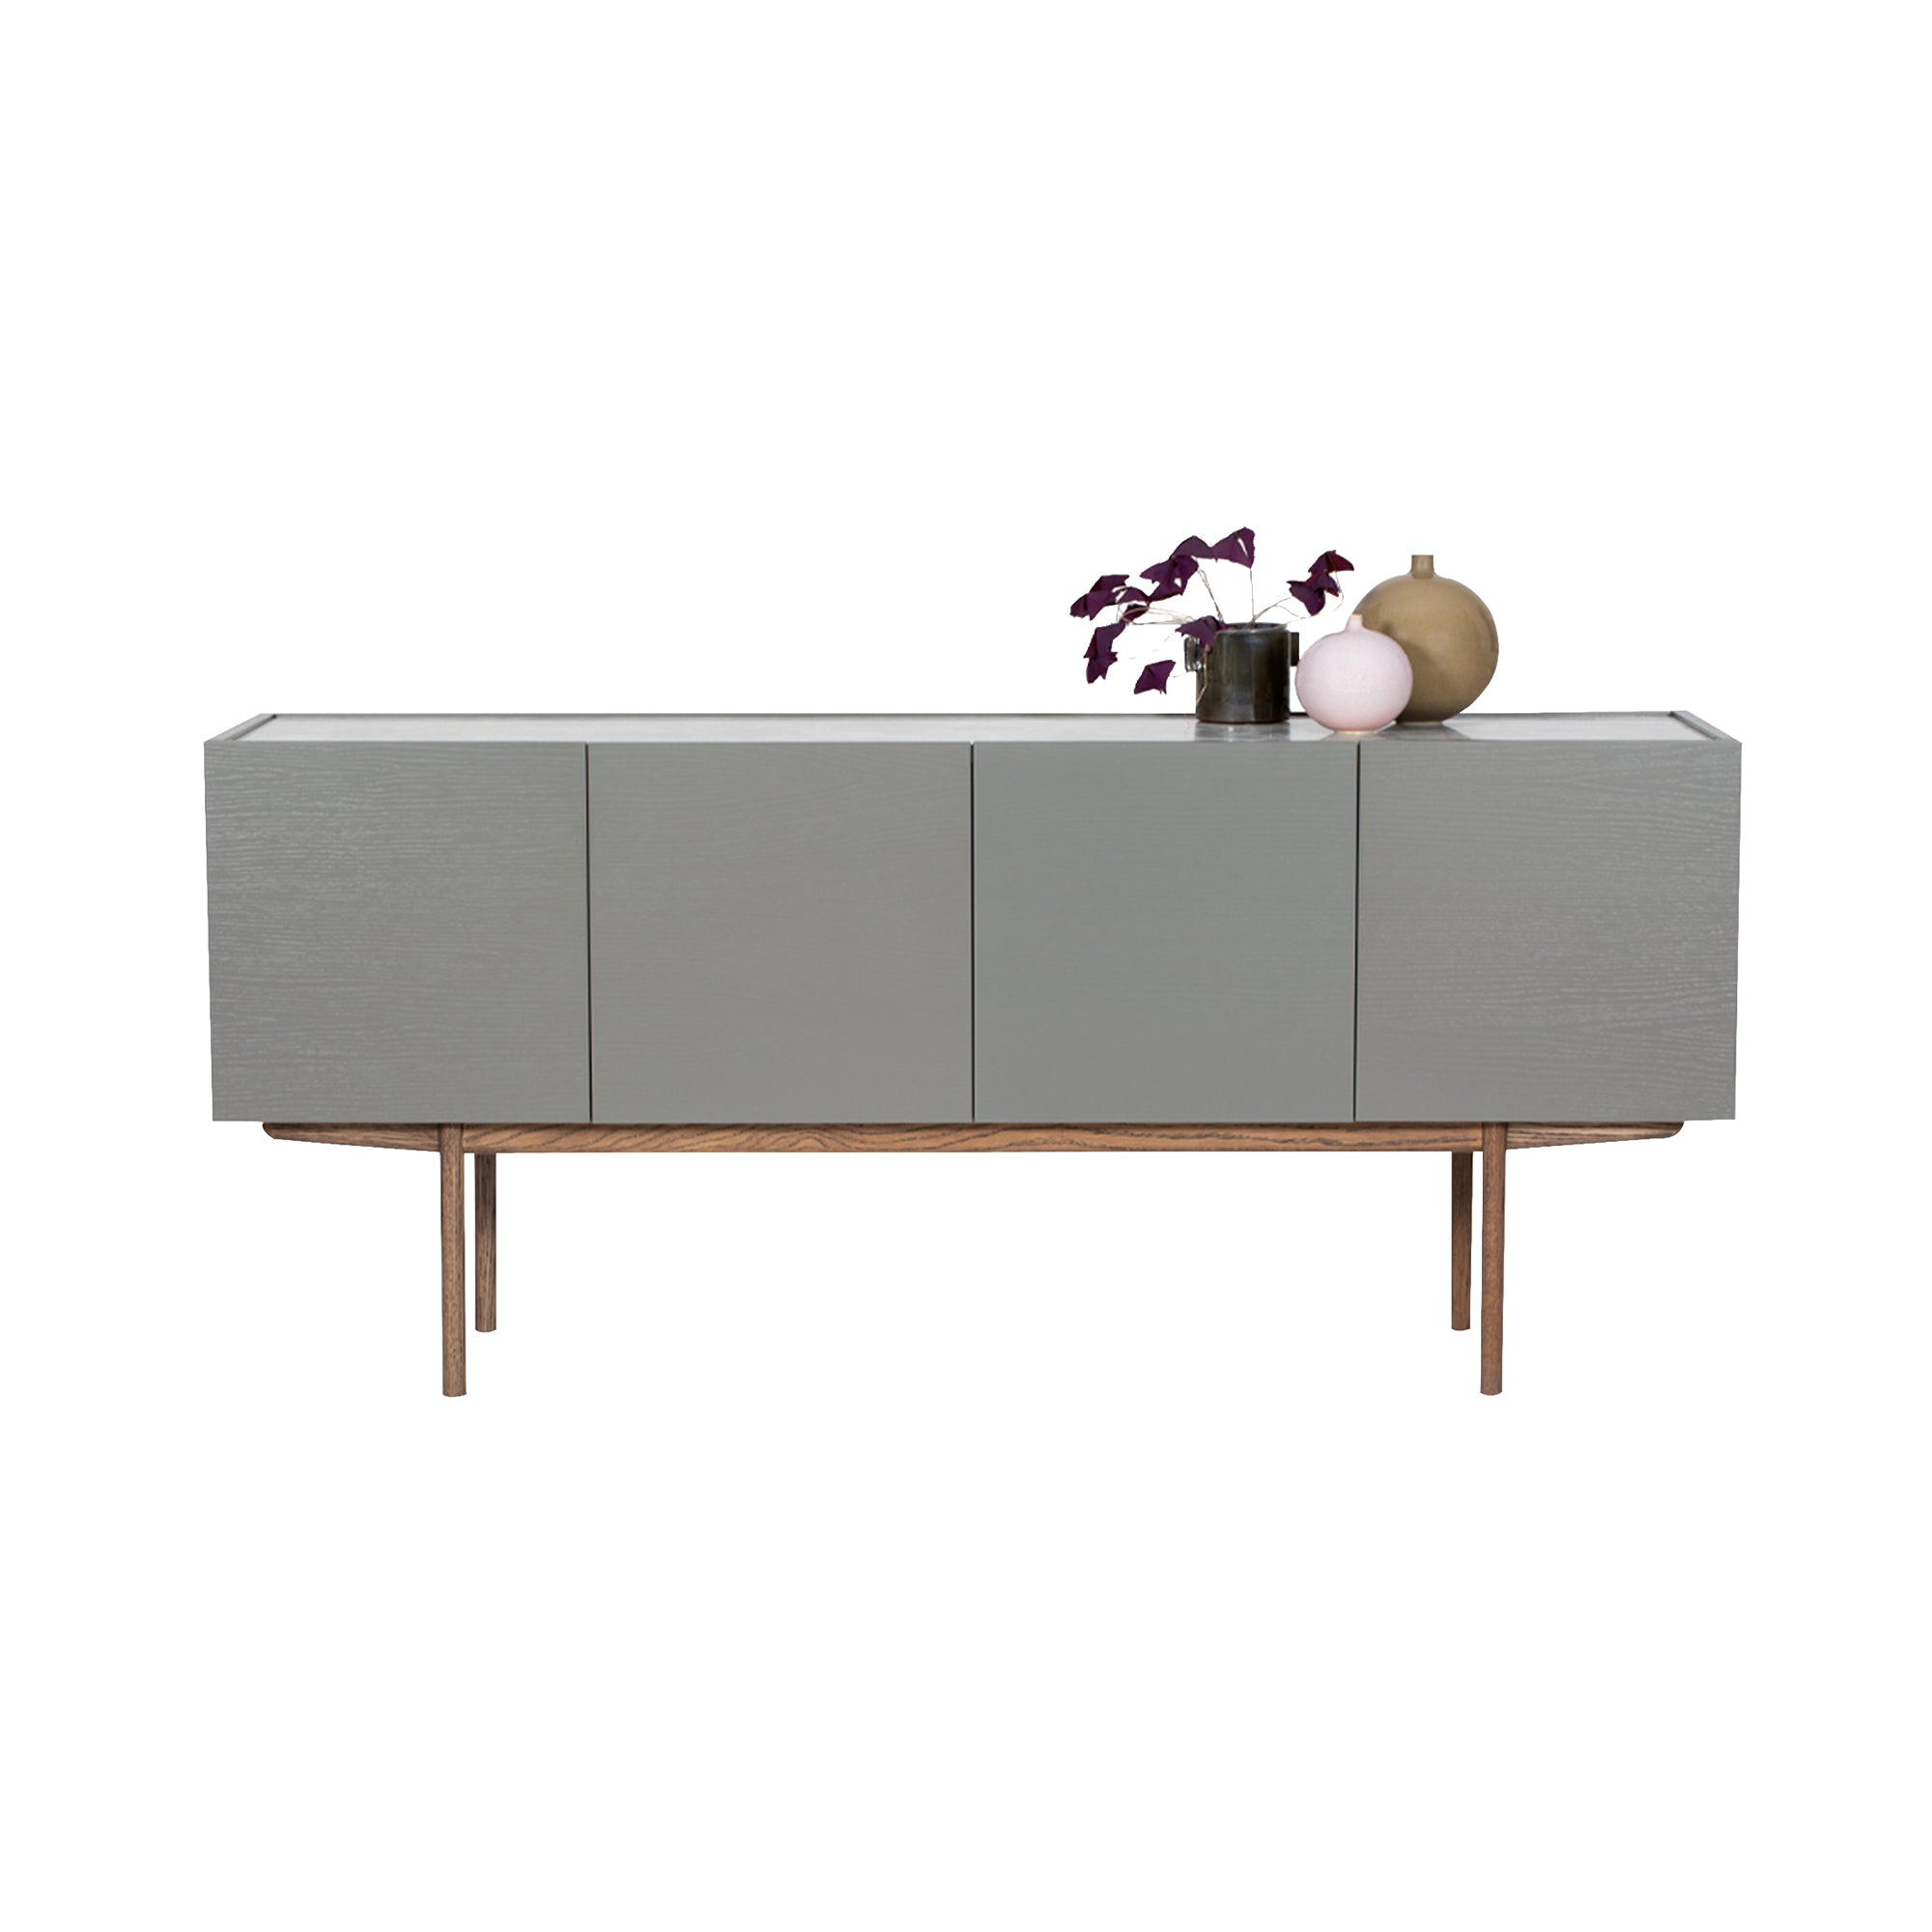 Luc Deluxe 160: Marble Top + Carrara Marble + Taupe + Dark Smoked Oak